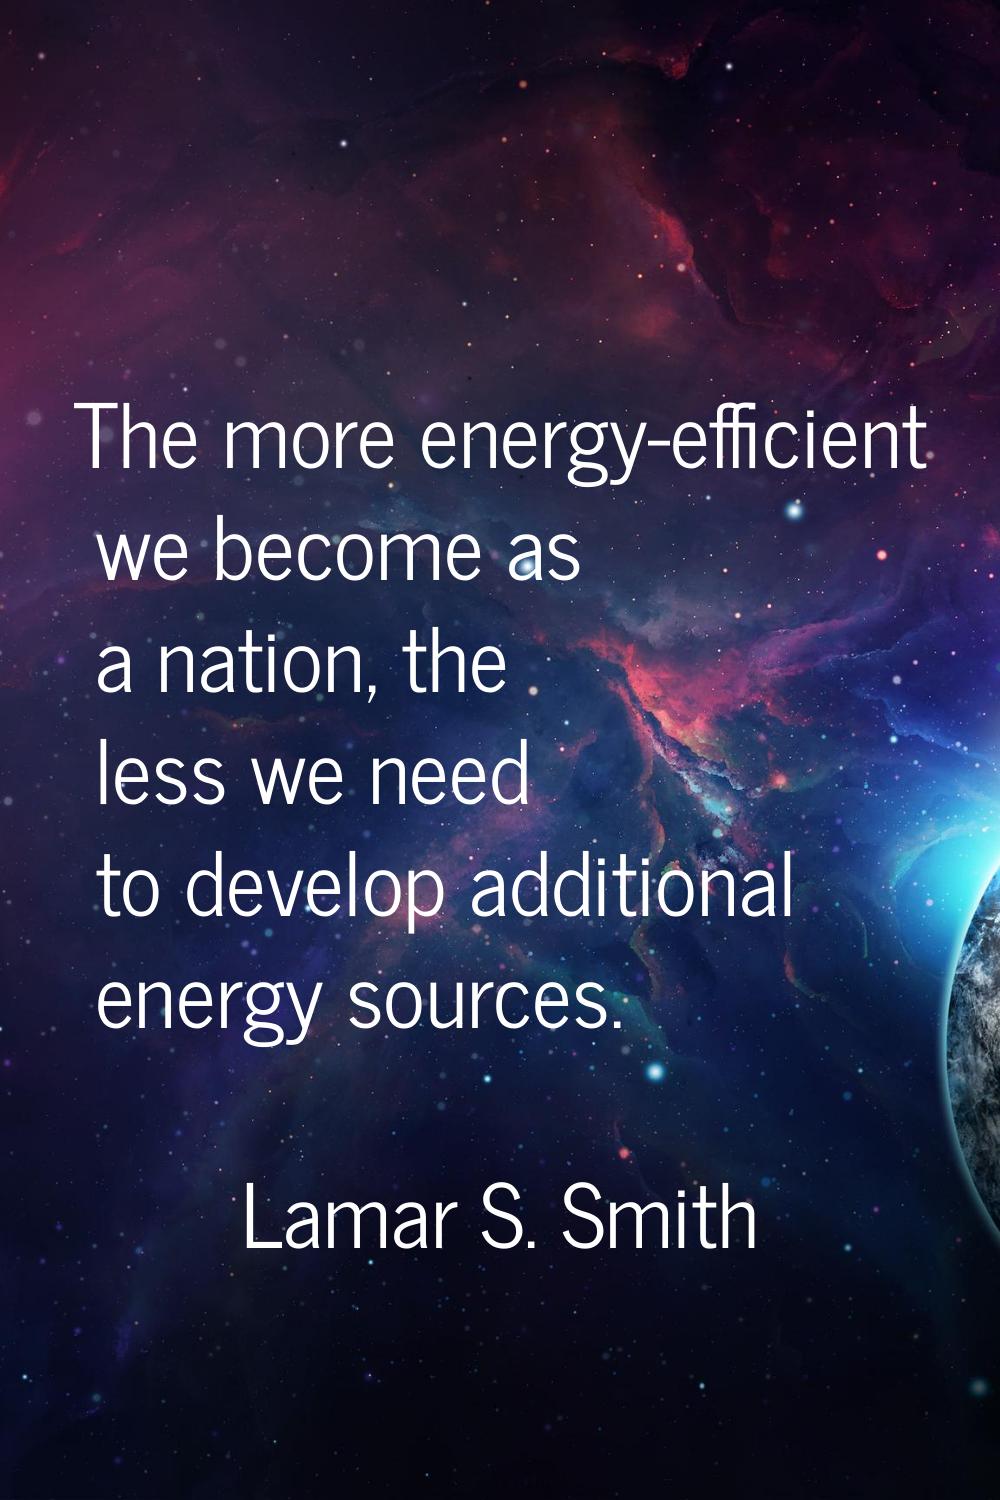 The more energy-efficient we become as a nation, the less we need to develop additional energy sour